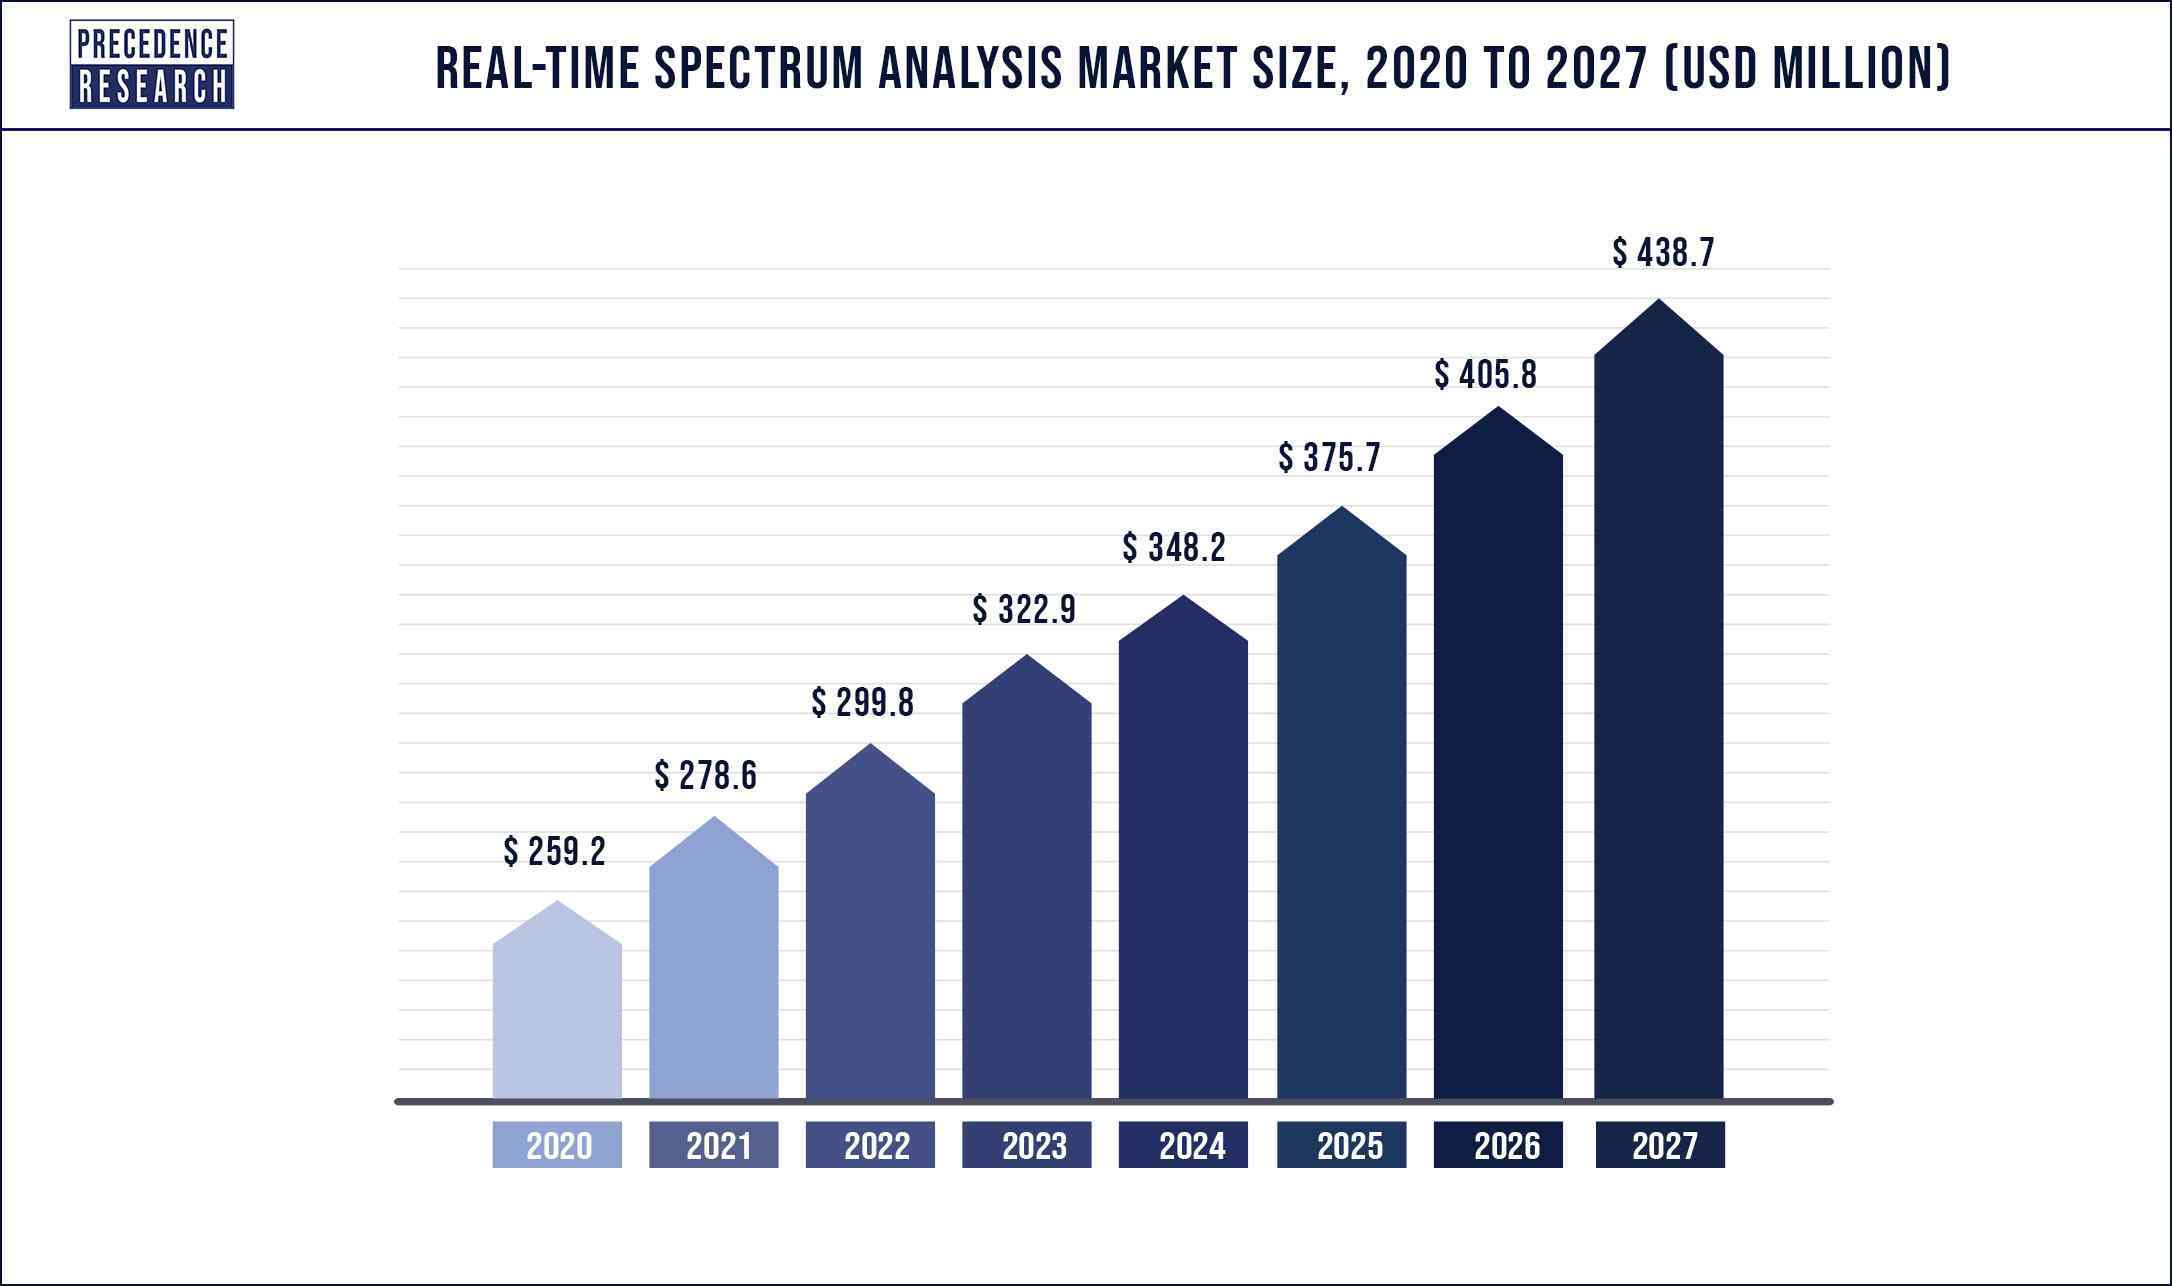 Real Time Spectrum Analysis Market Size 2020 to 2027